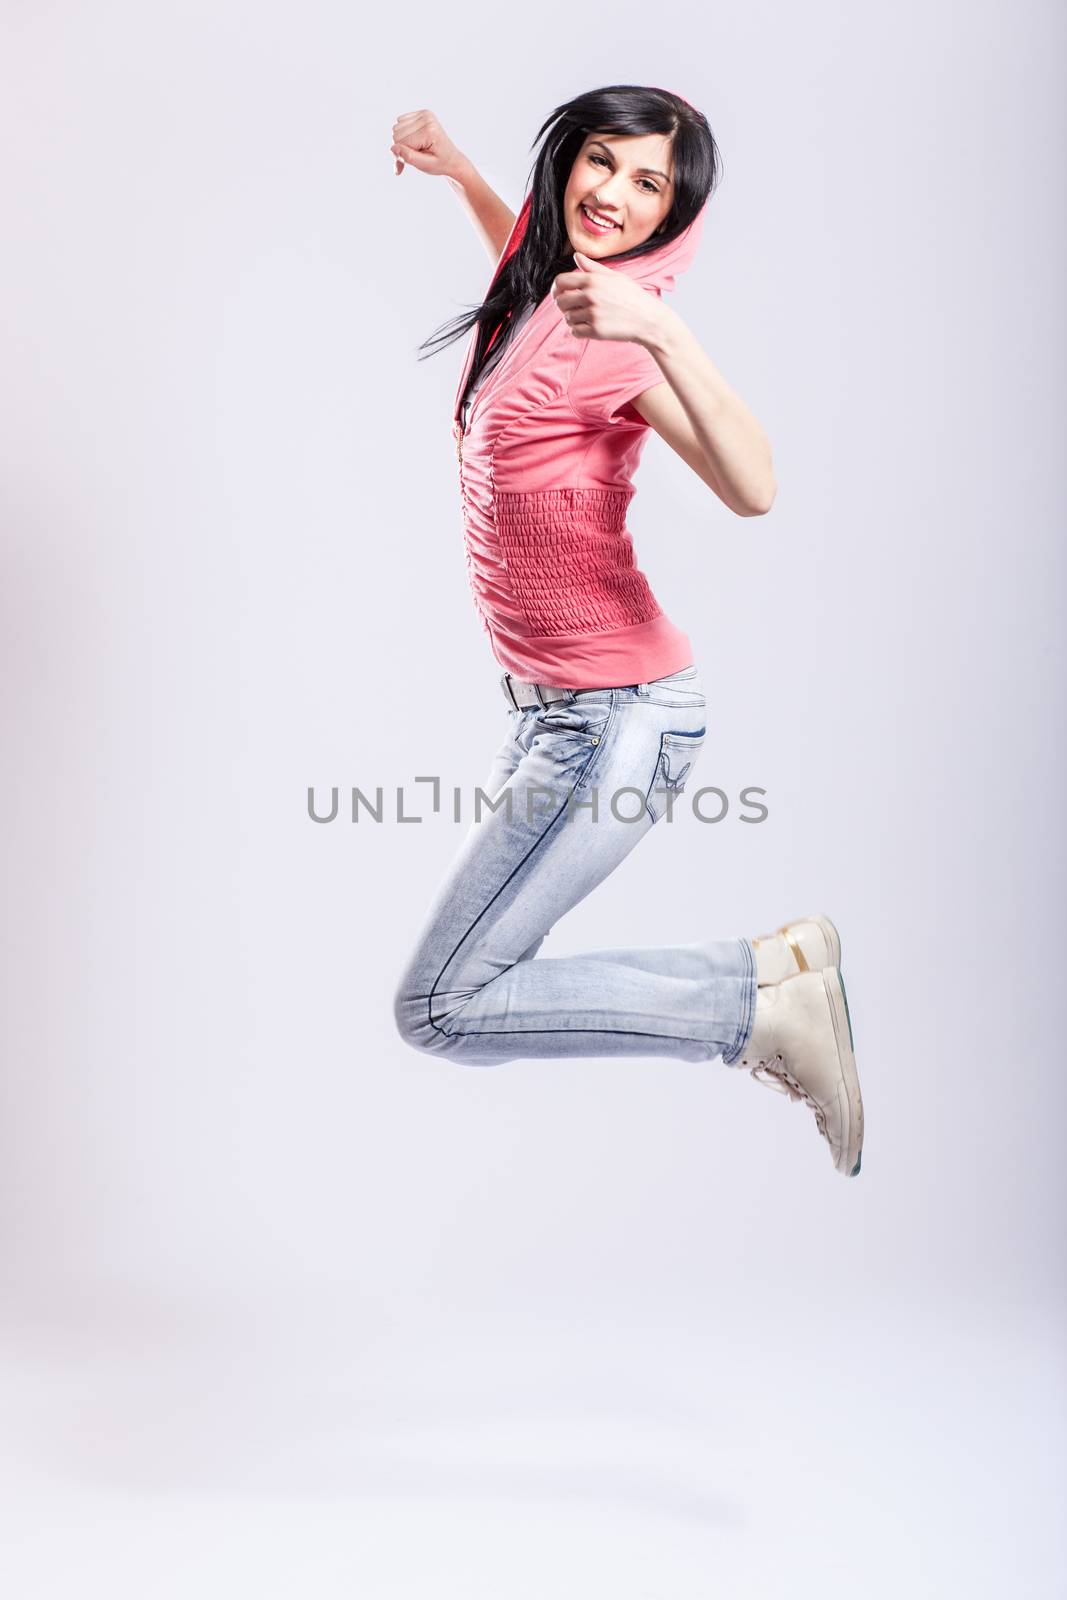 attractive young girl jumping, wearing pink hoodie and jeans